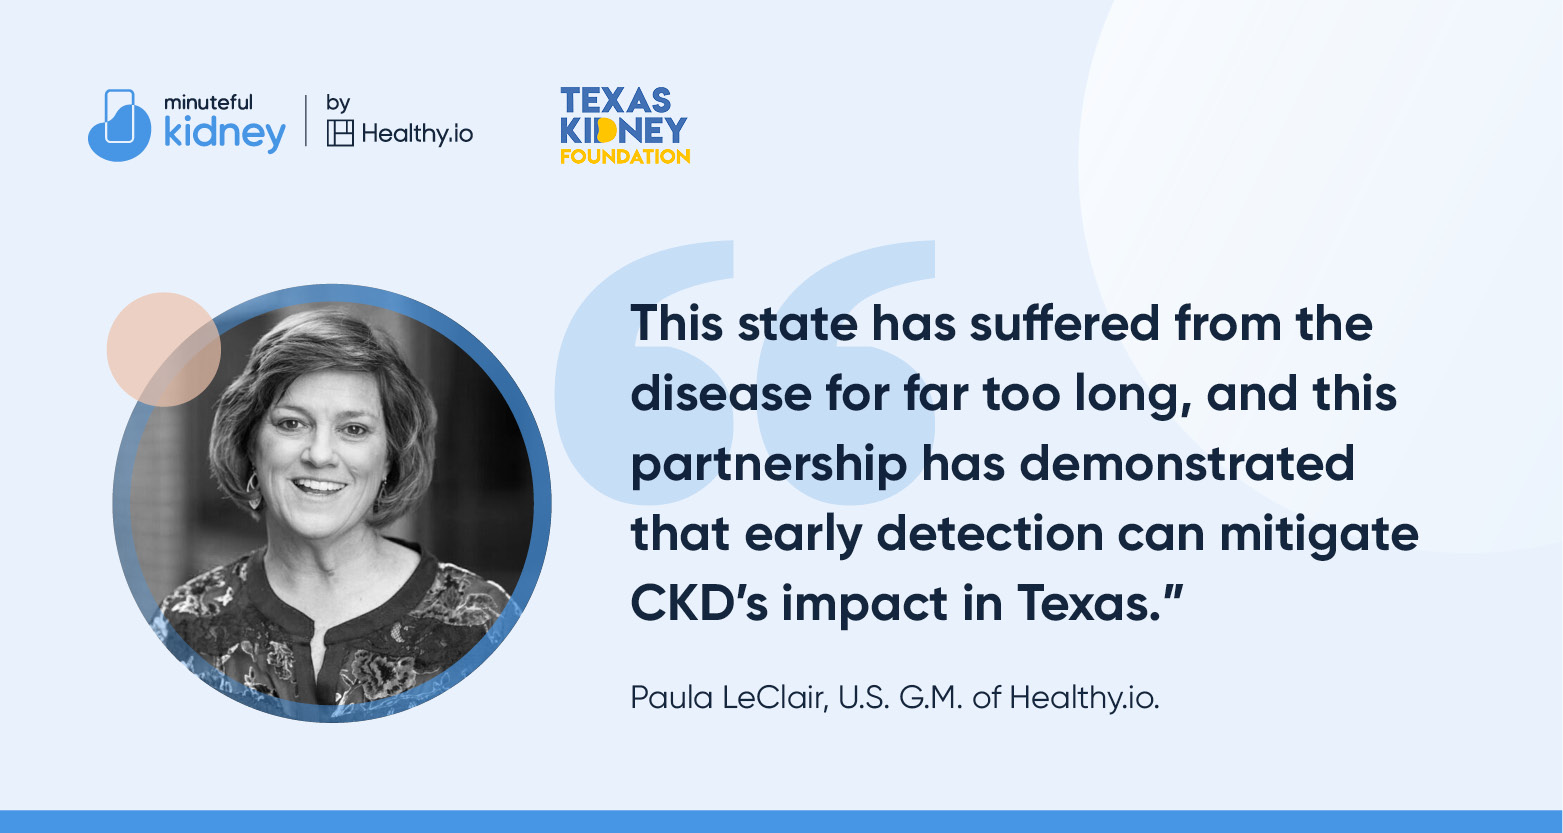 Paula LeClair, US GM of Healthy.io: This state has suffered from the disease for far too long, and this partnership has demonstrated that early detection can mitigate CKD